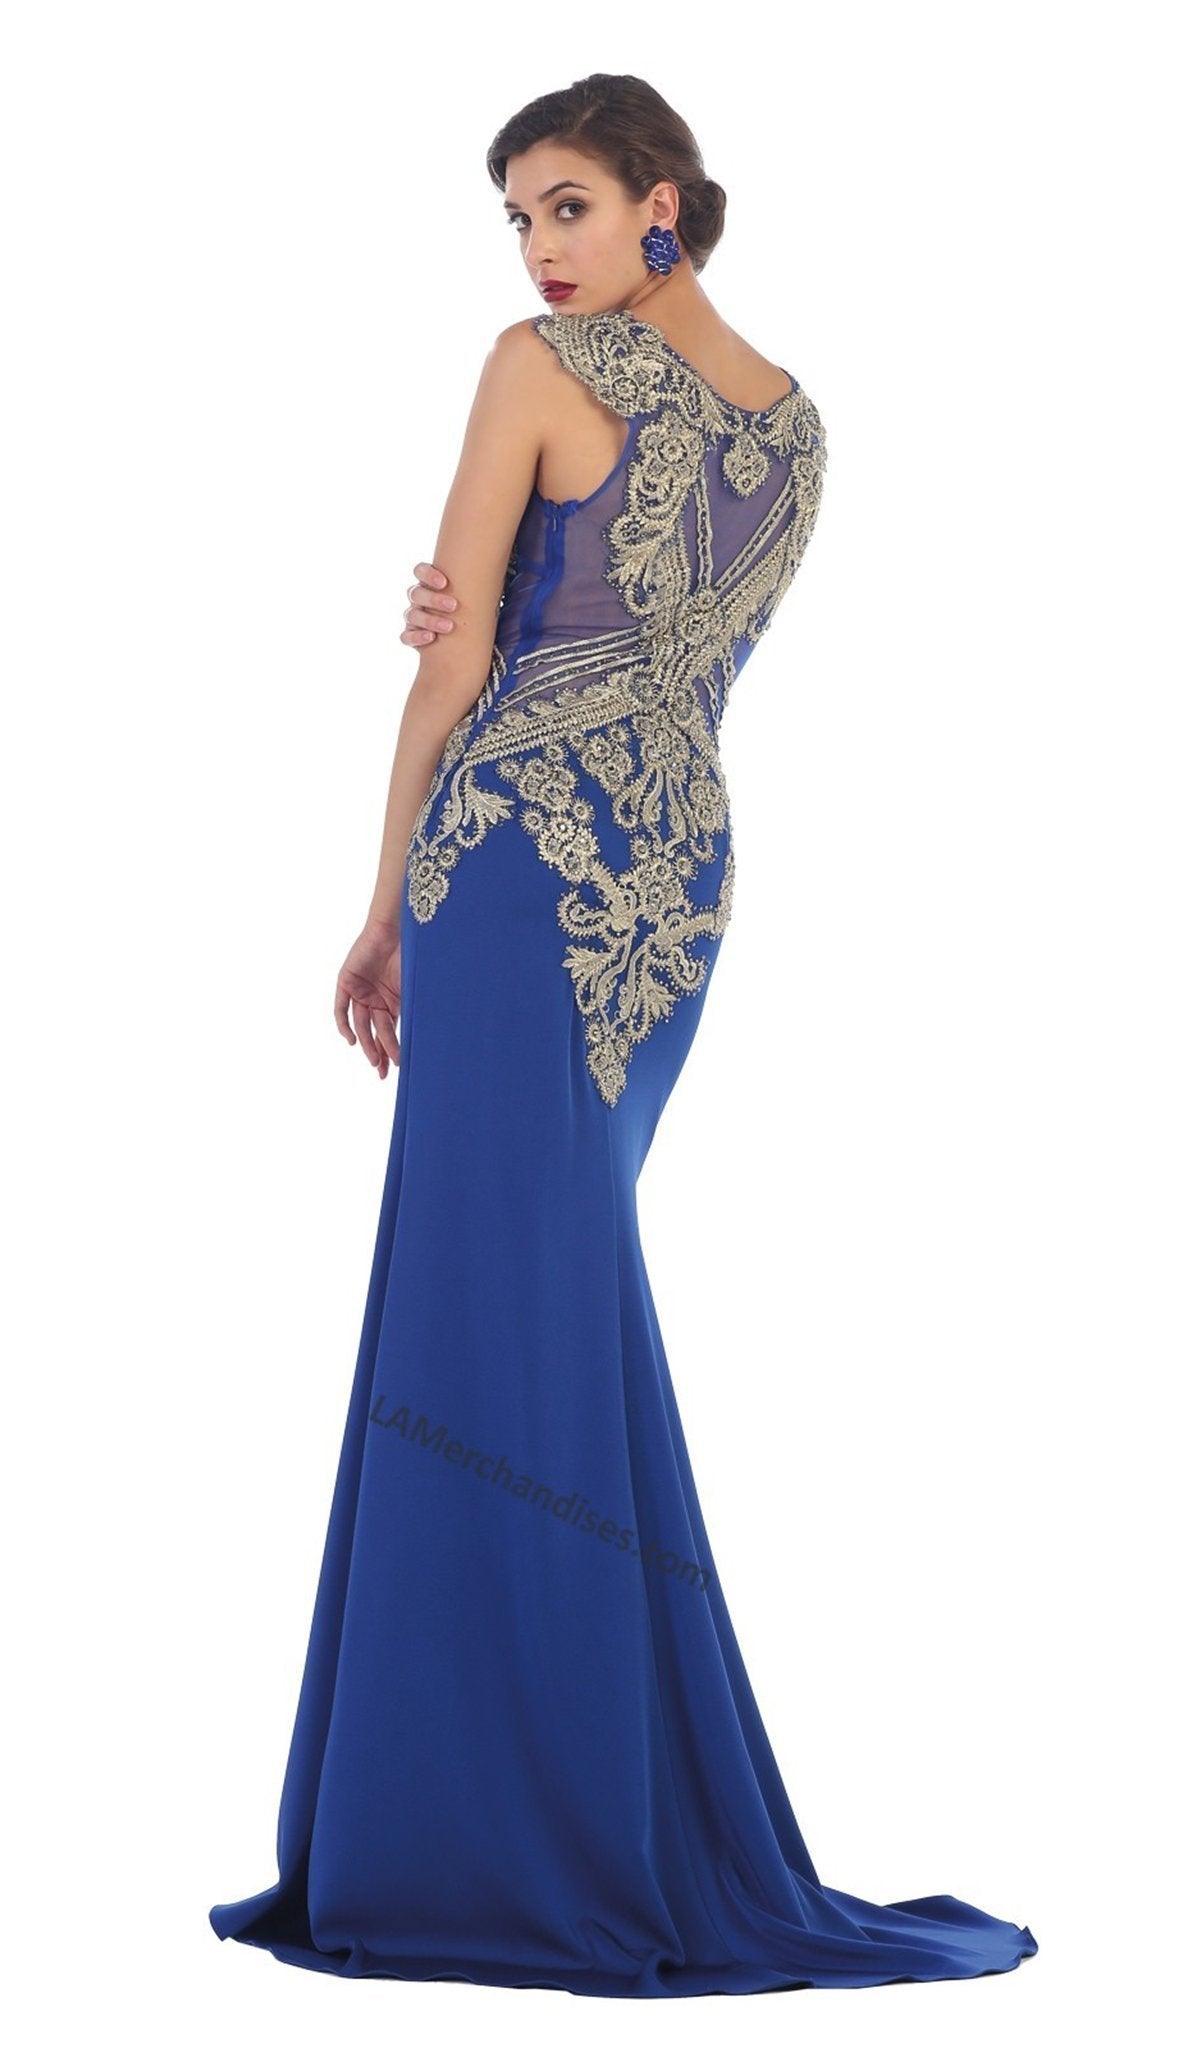 May Queen - Gilded Illusion Jewel Sheath Evening Dress RQ-7434 In Blue and Gold